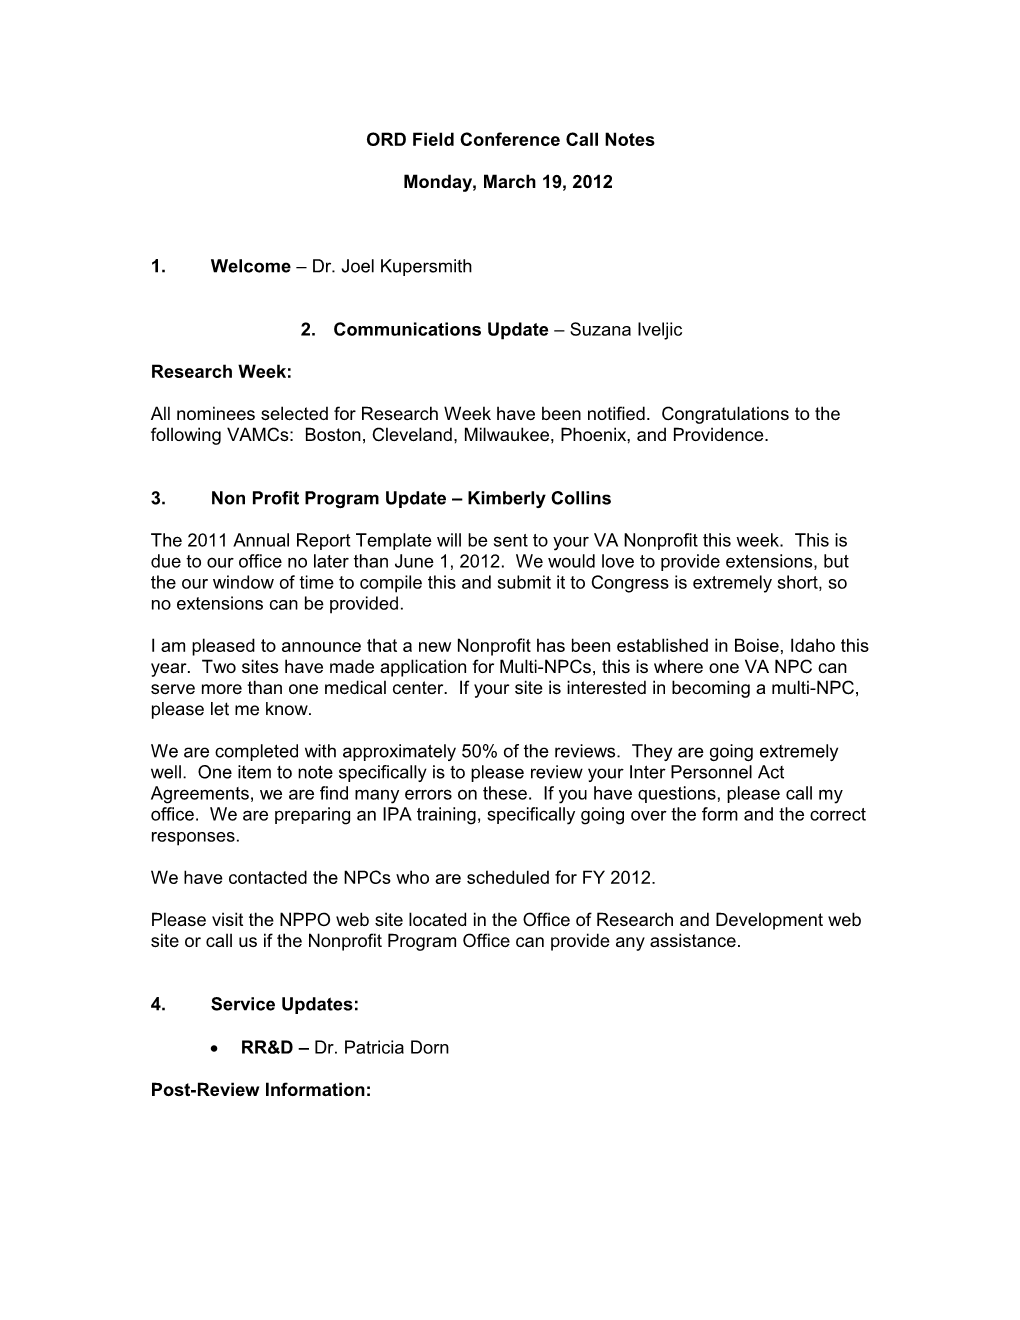 ORD Field Conference Call Notes: Monday, March 19, 2012